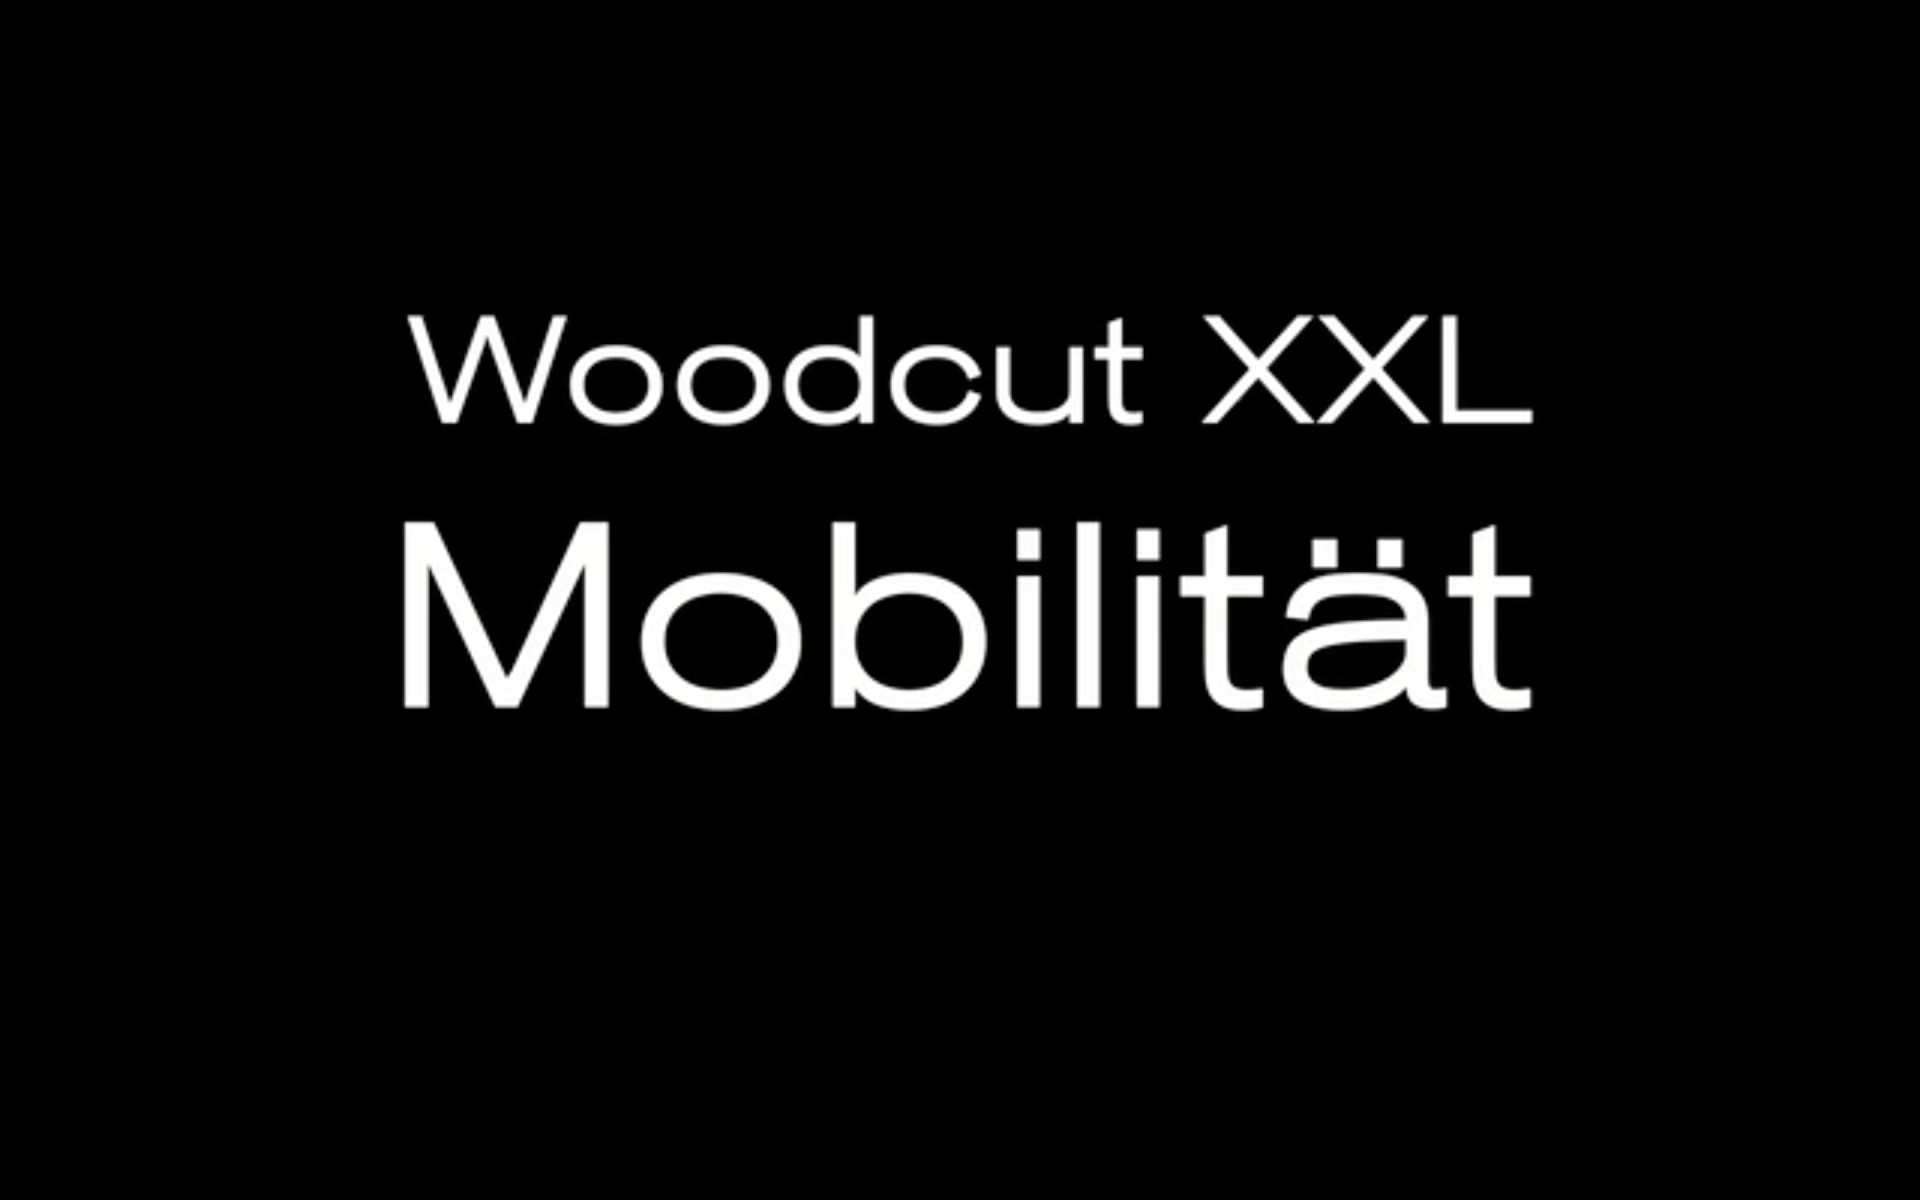 New video in the HGB media library: Woodcut XXL